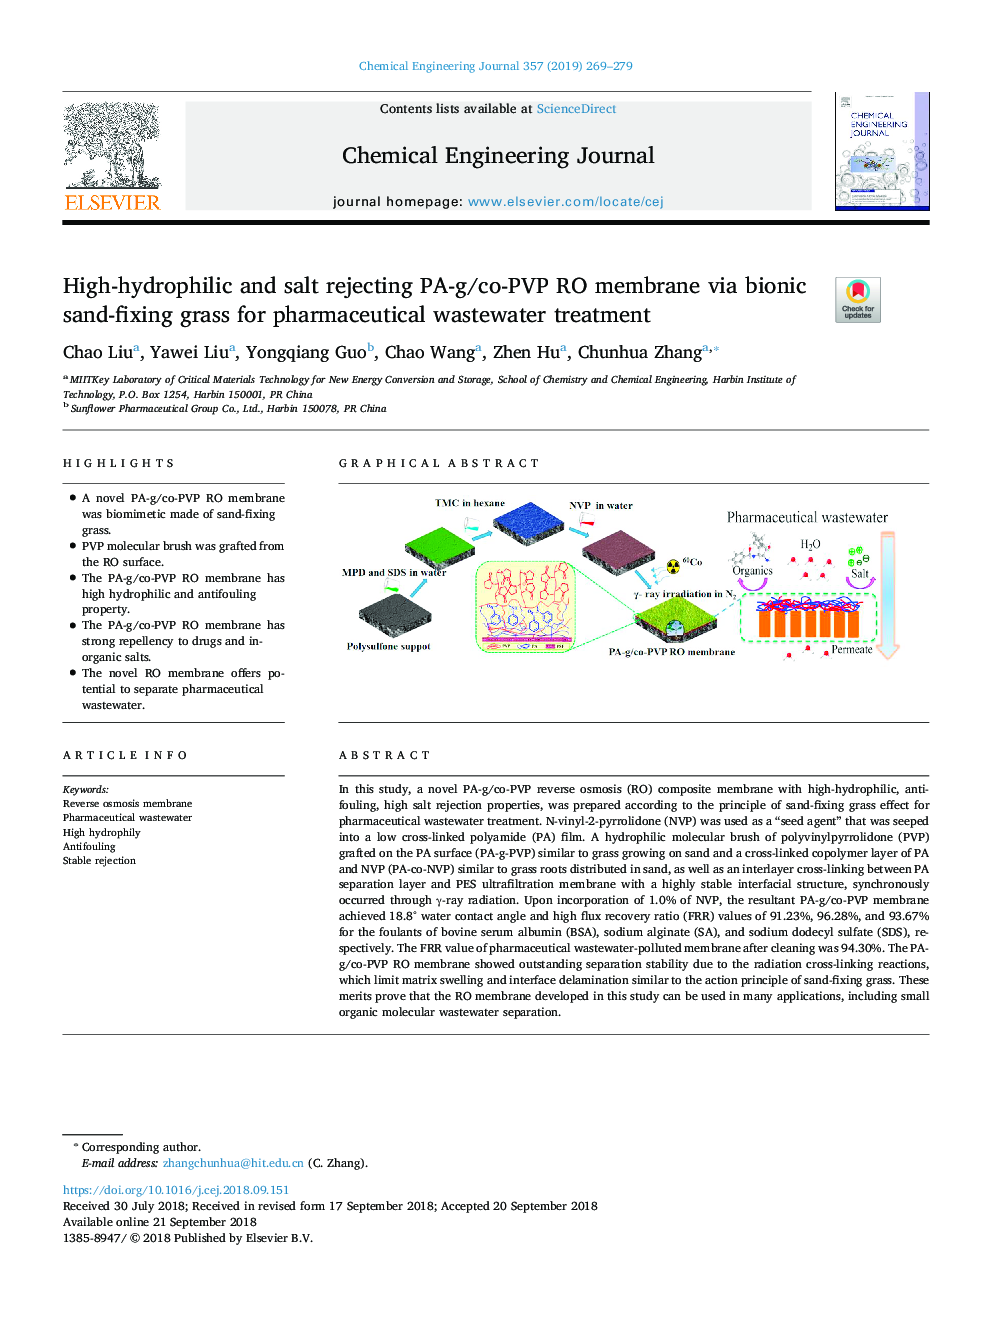 High-hydrophilic and salt rejecting PA-g/co-PVP RO membrane via bionic sand-fixing grass for pharmaceutical wastewater treatment